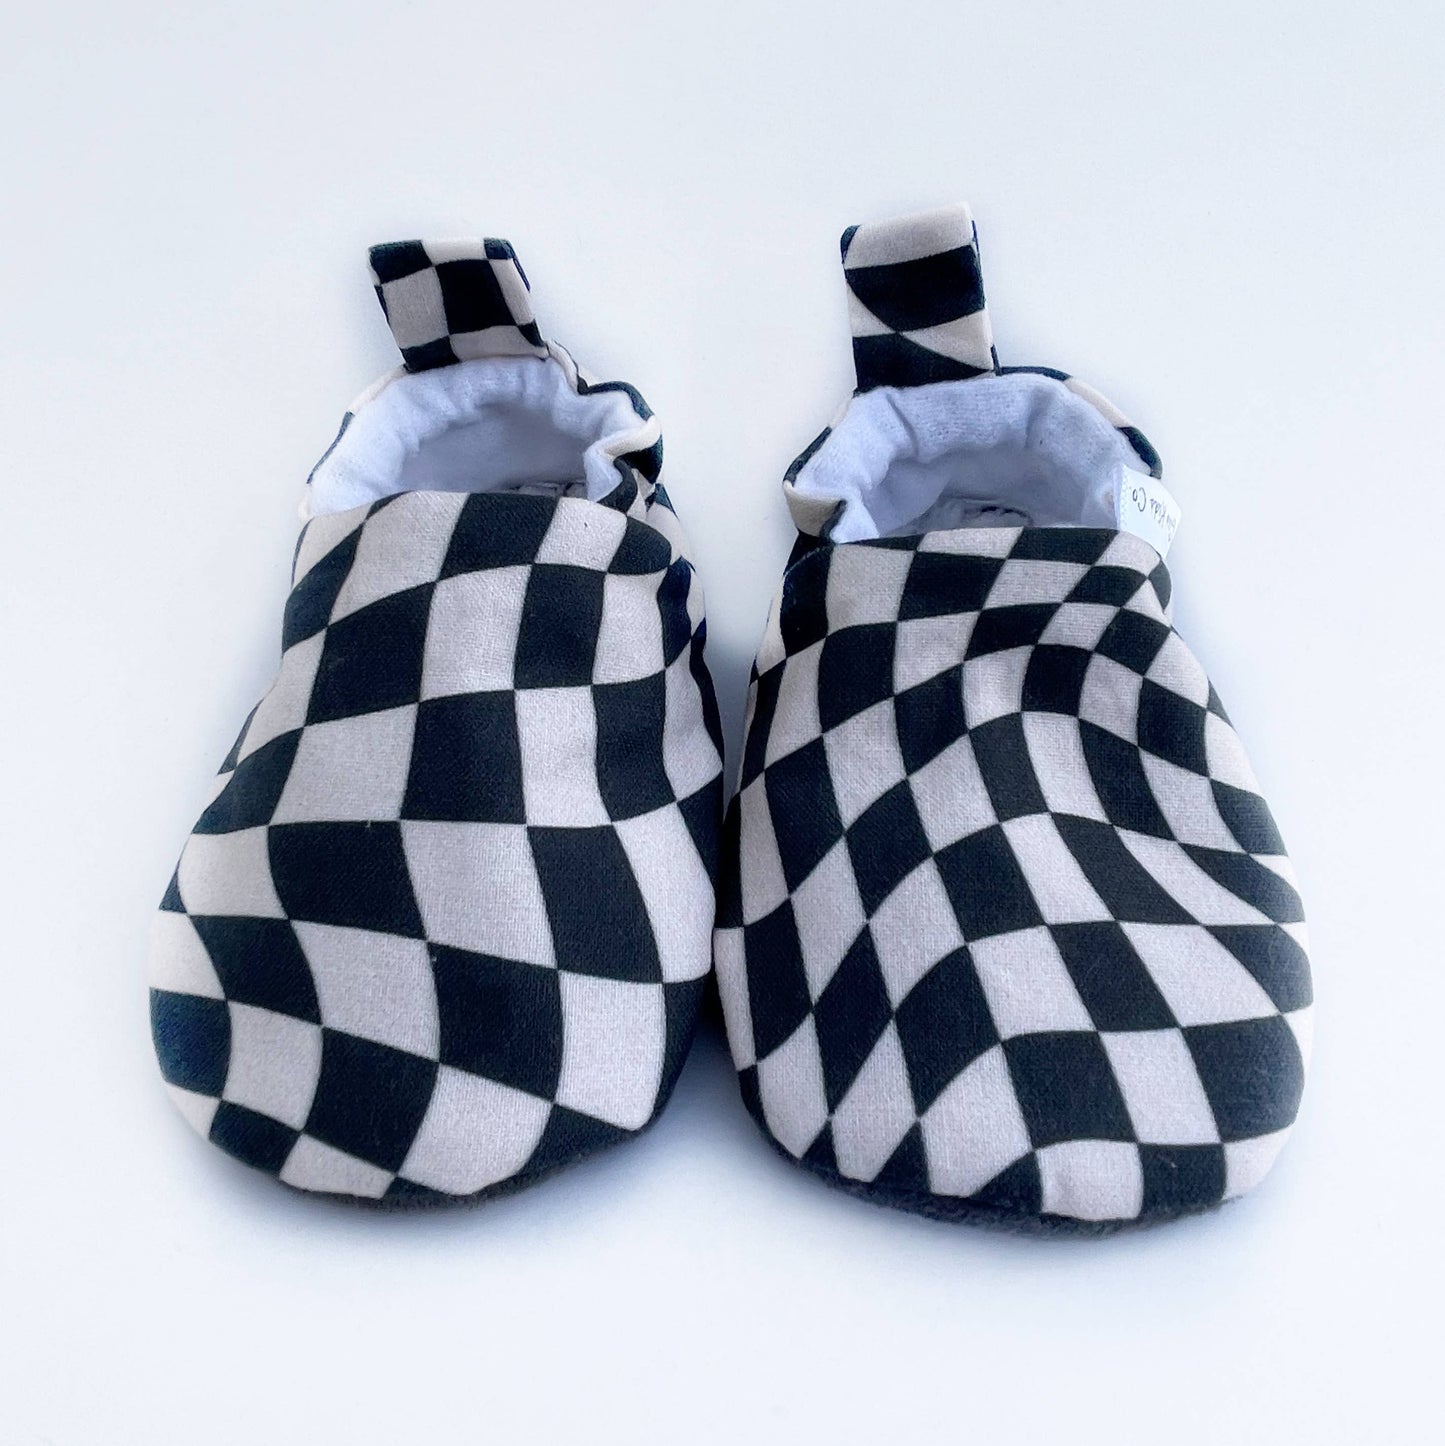 Wavy Checkerboard Baby Shoes: 6-12m / Rubber and toe guards